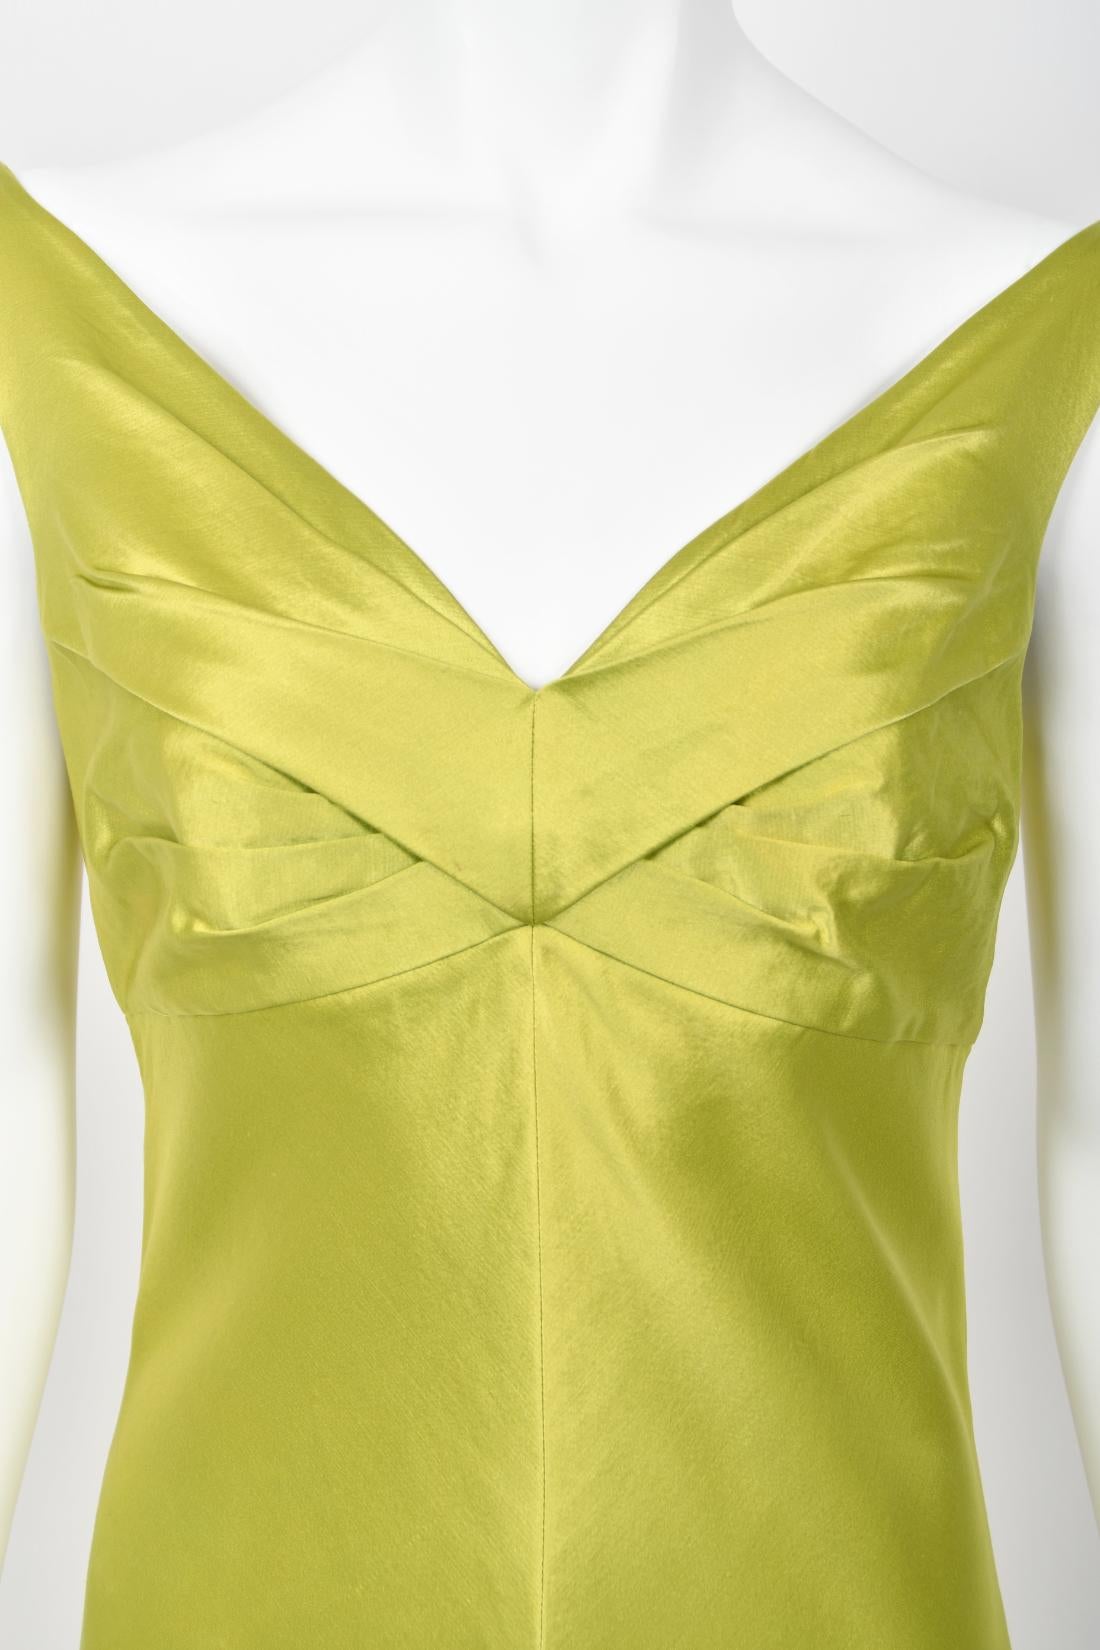 1995 Gianni Versace Couture Documented Runway Chartreuse Silk Off-Shoulder Gown For Sale 5